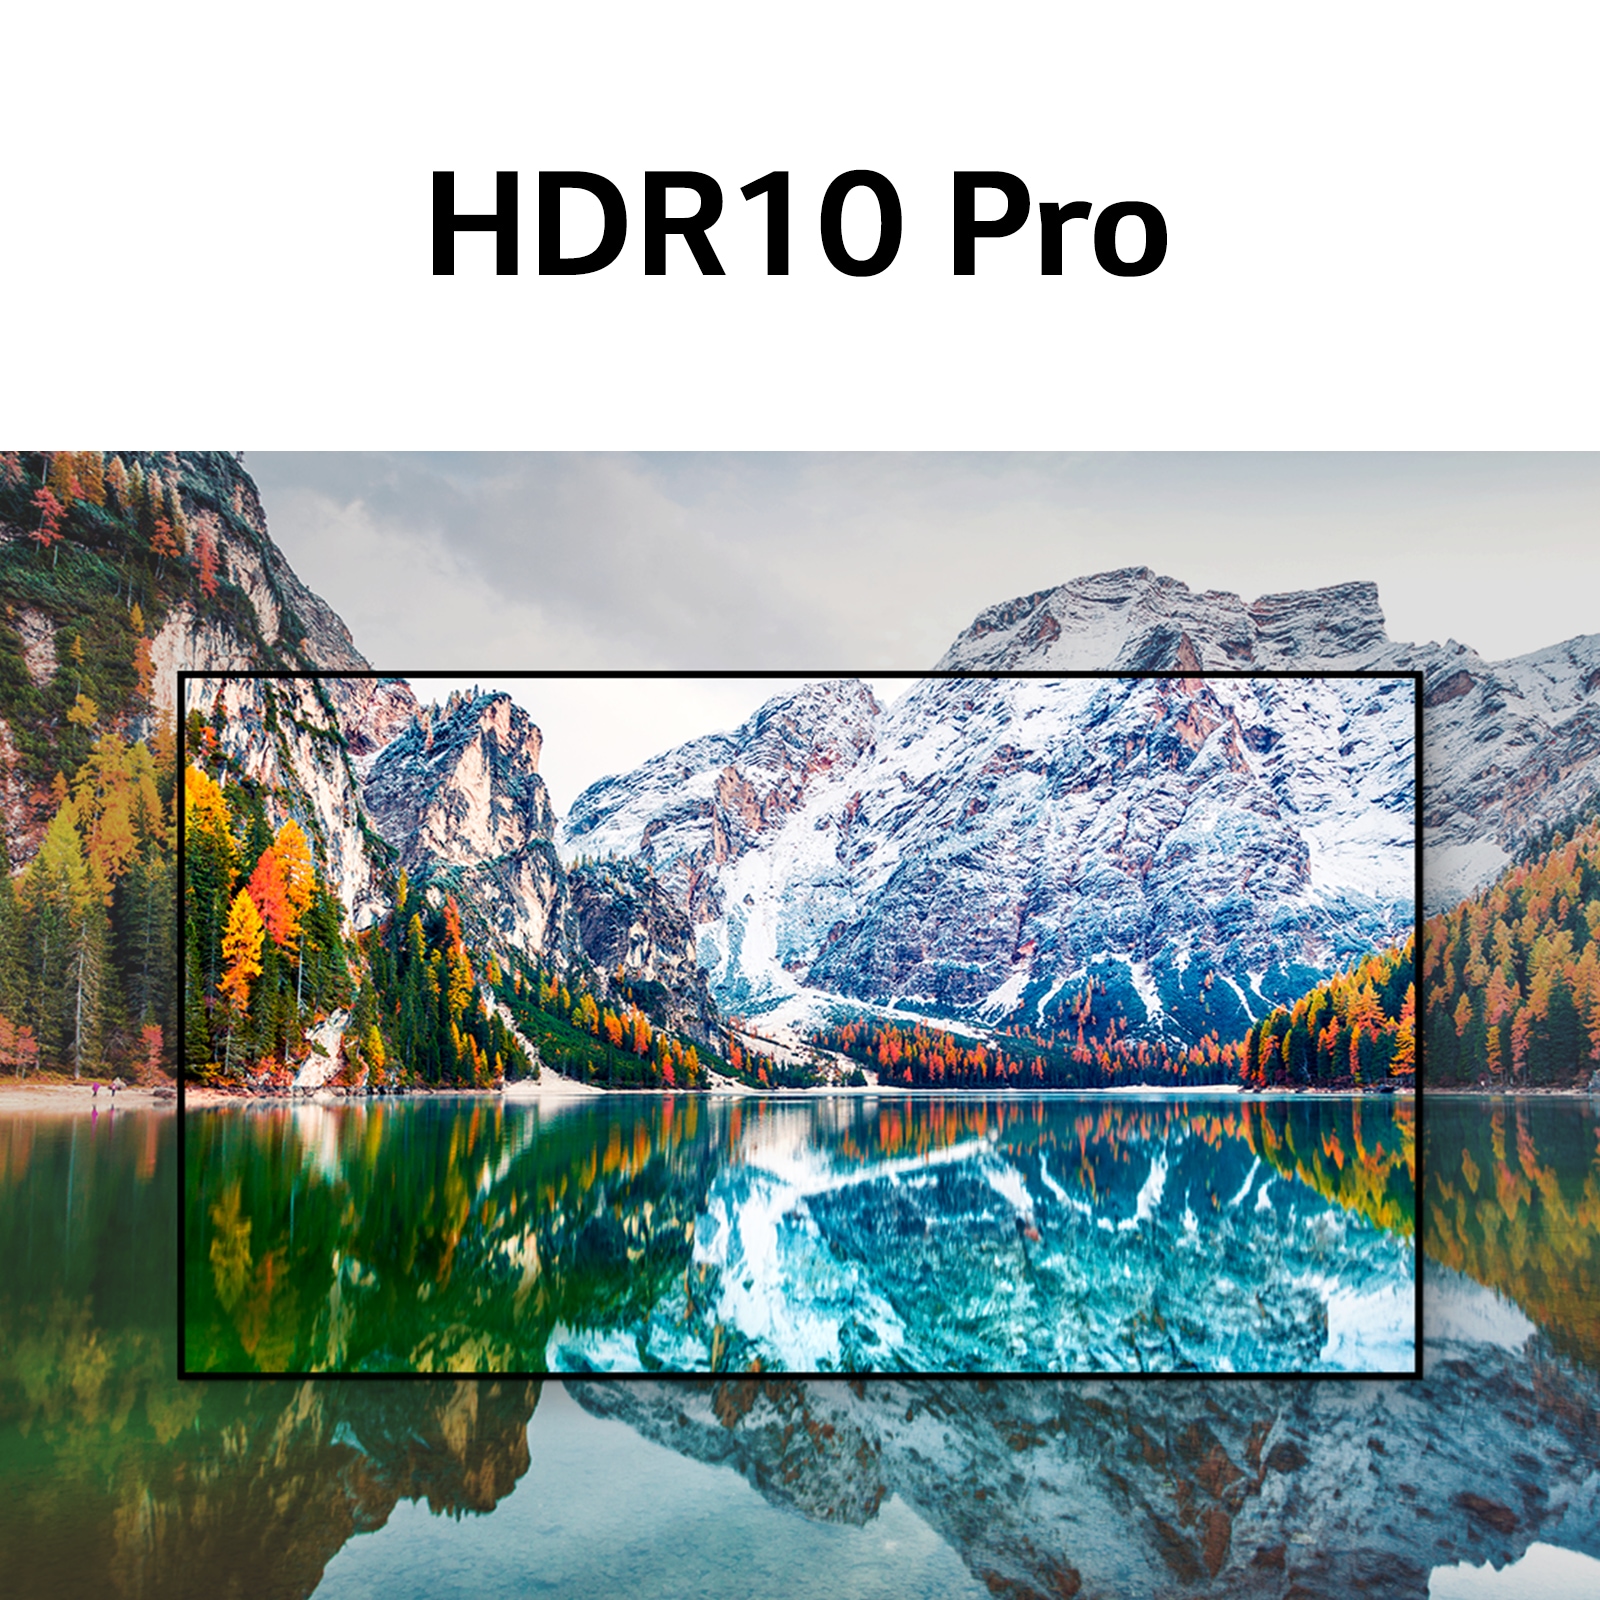 Enriched - CE - LG UHD Series - HDR10 Pro